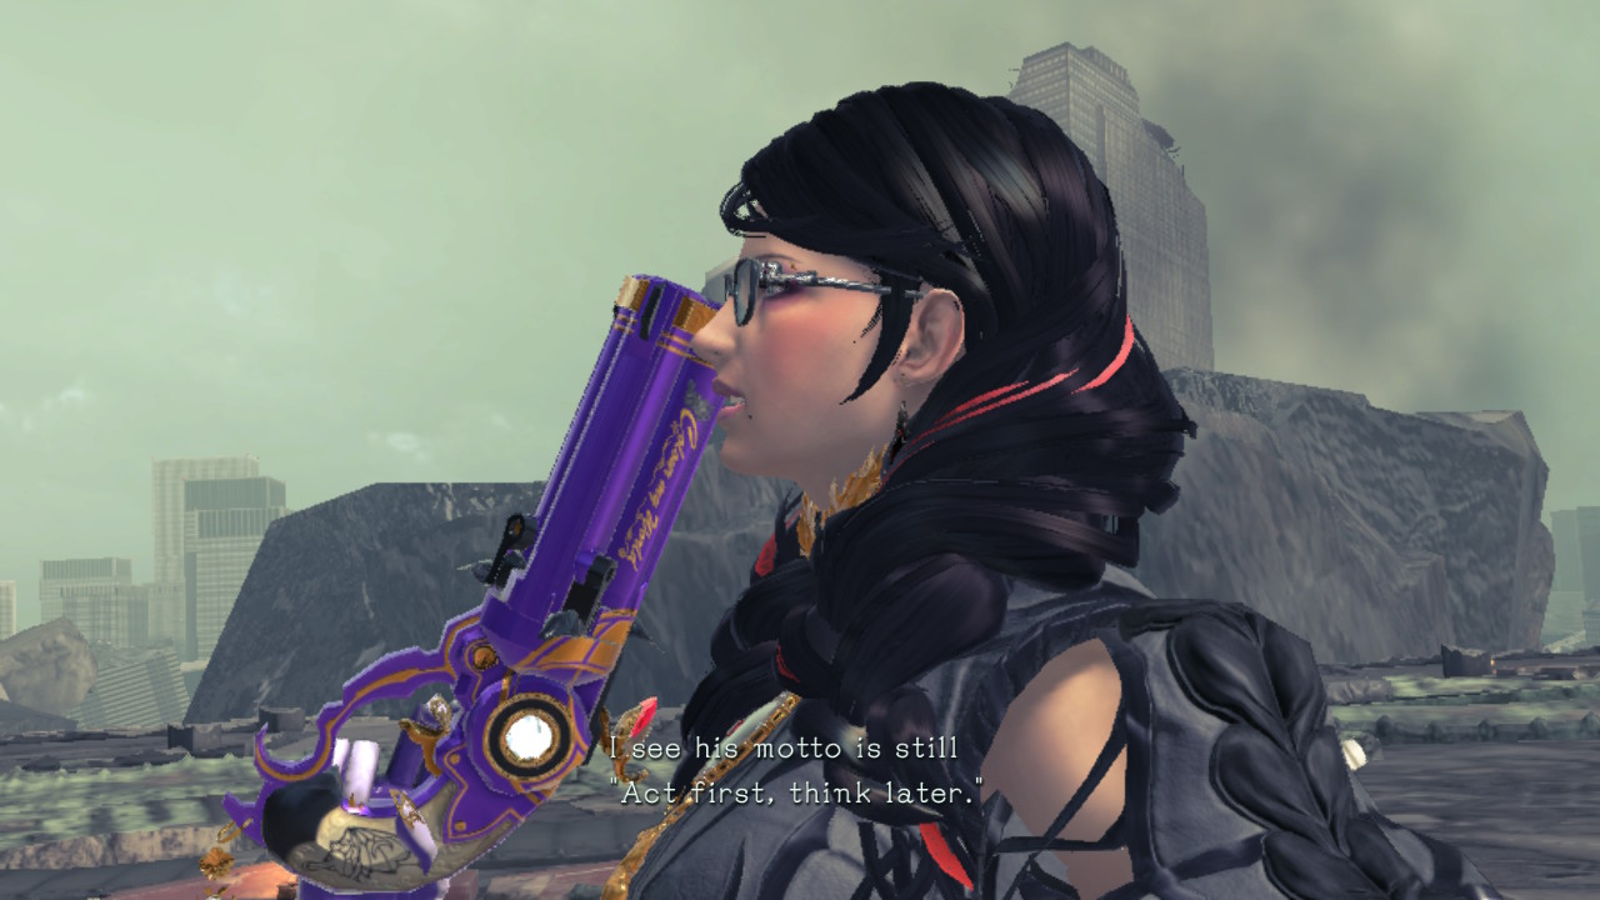 Bayonetta 3 review roundup – 'an outrageous and fitting return to form